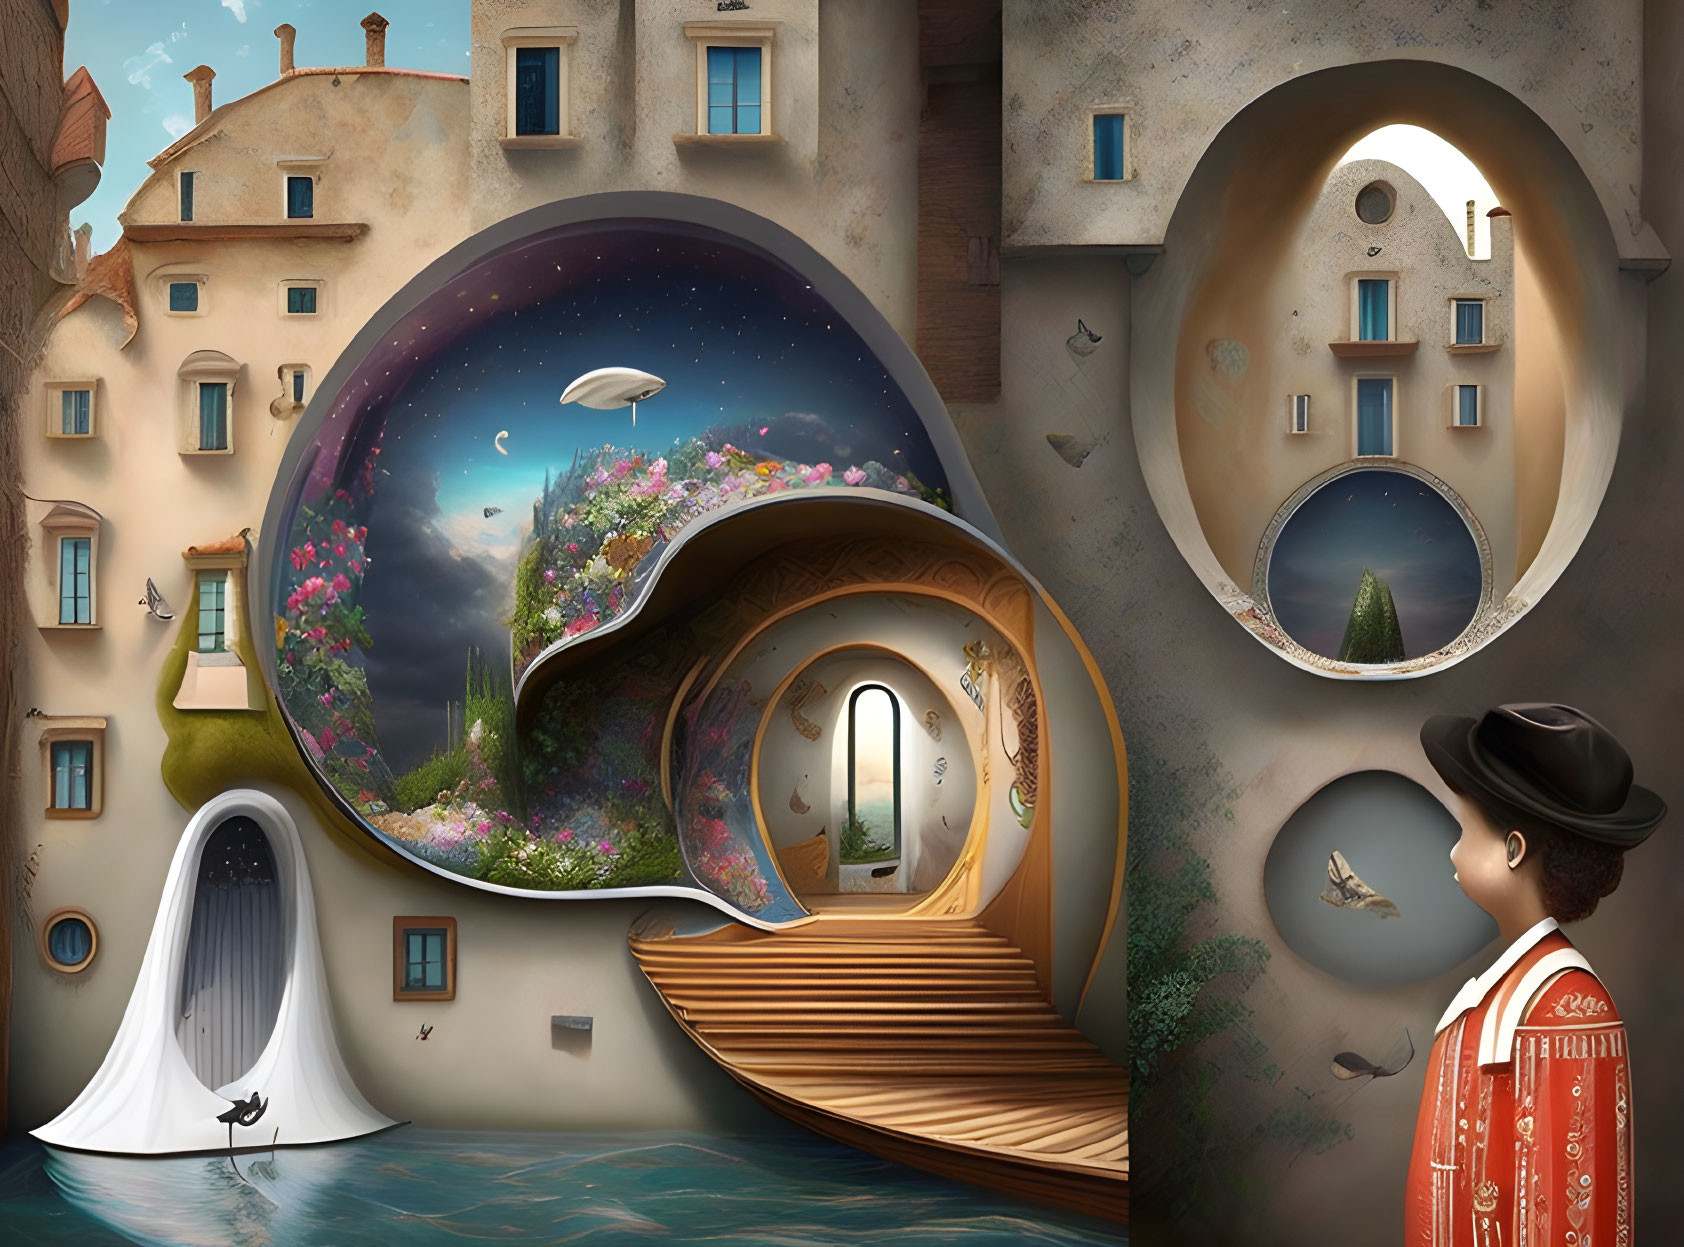 Surreal artwork: Person, snail-shaped house, vibrant flowers, whimsical buildings, tranquil